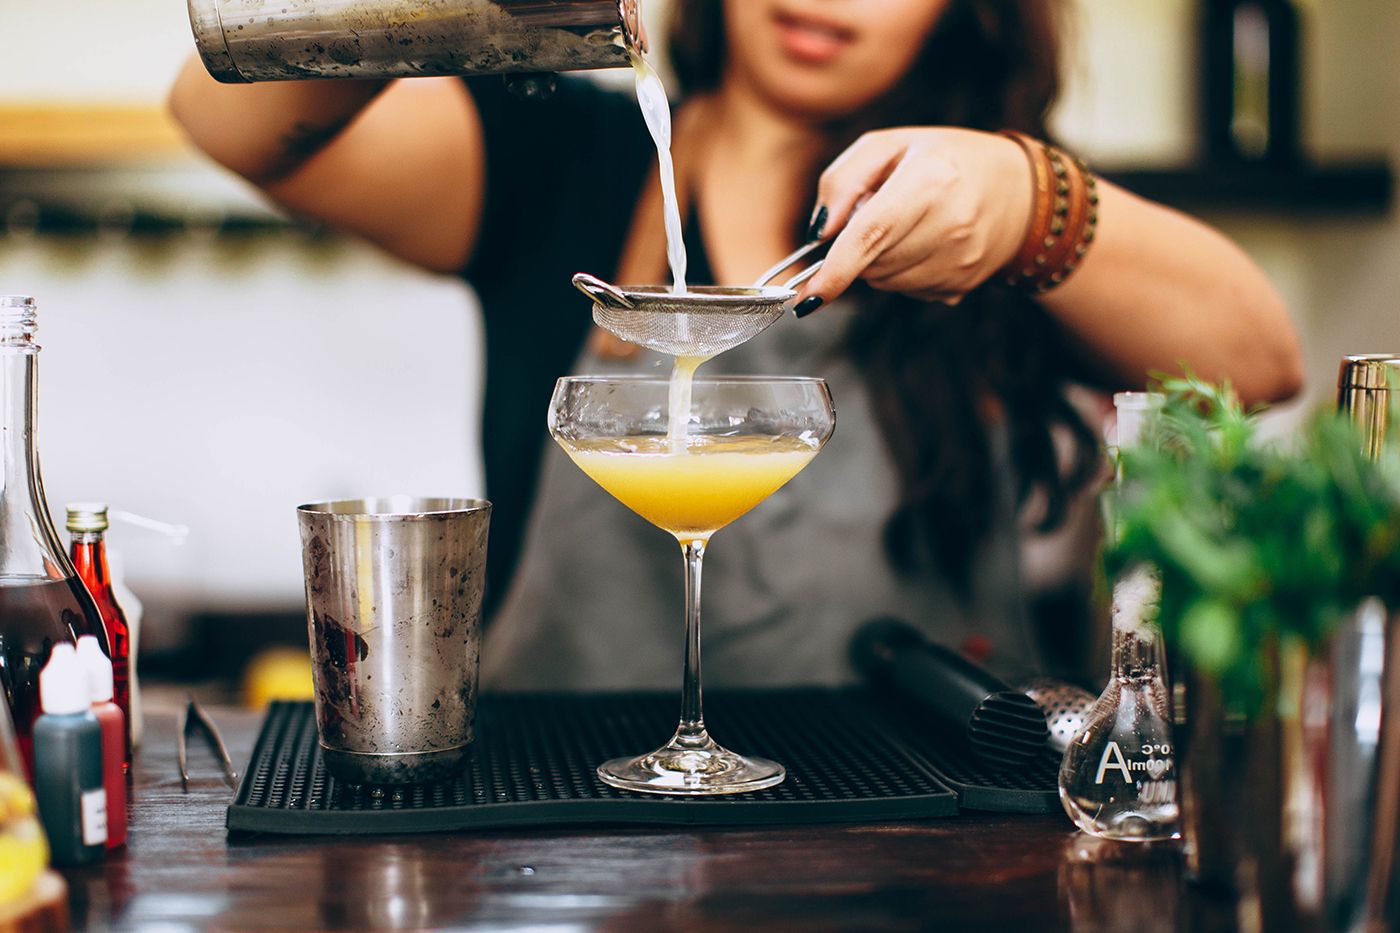 How much should I tip a bartender?